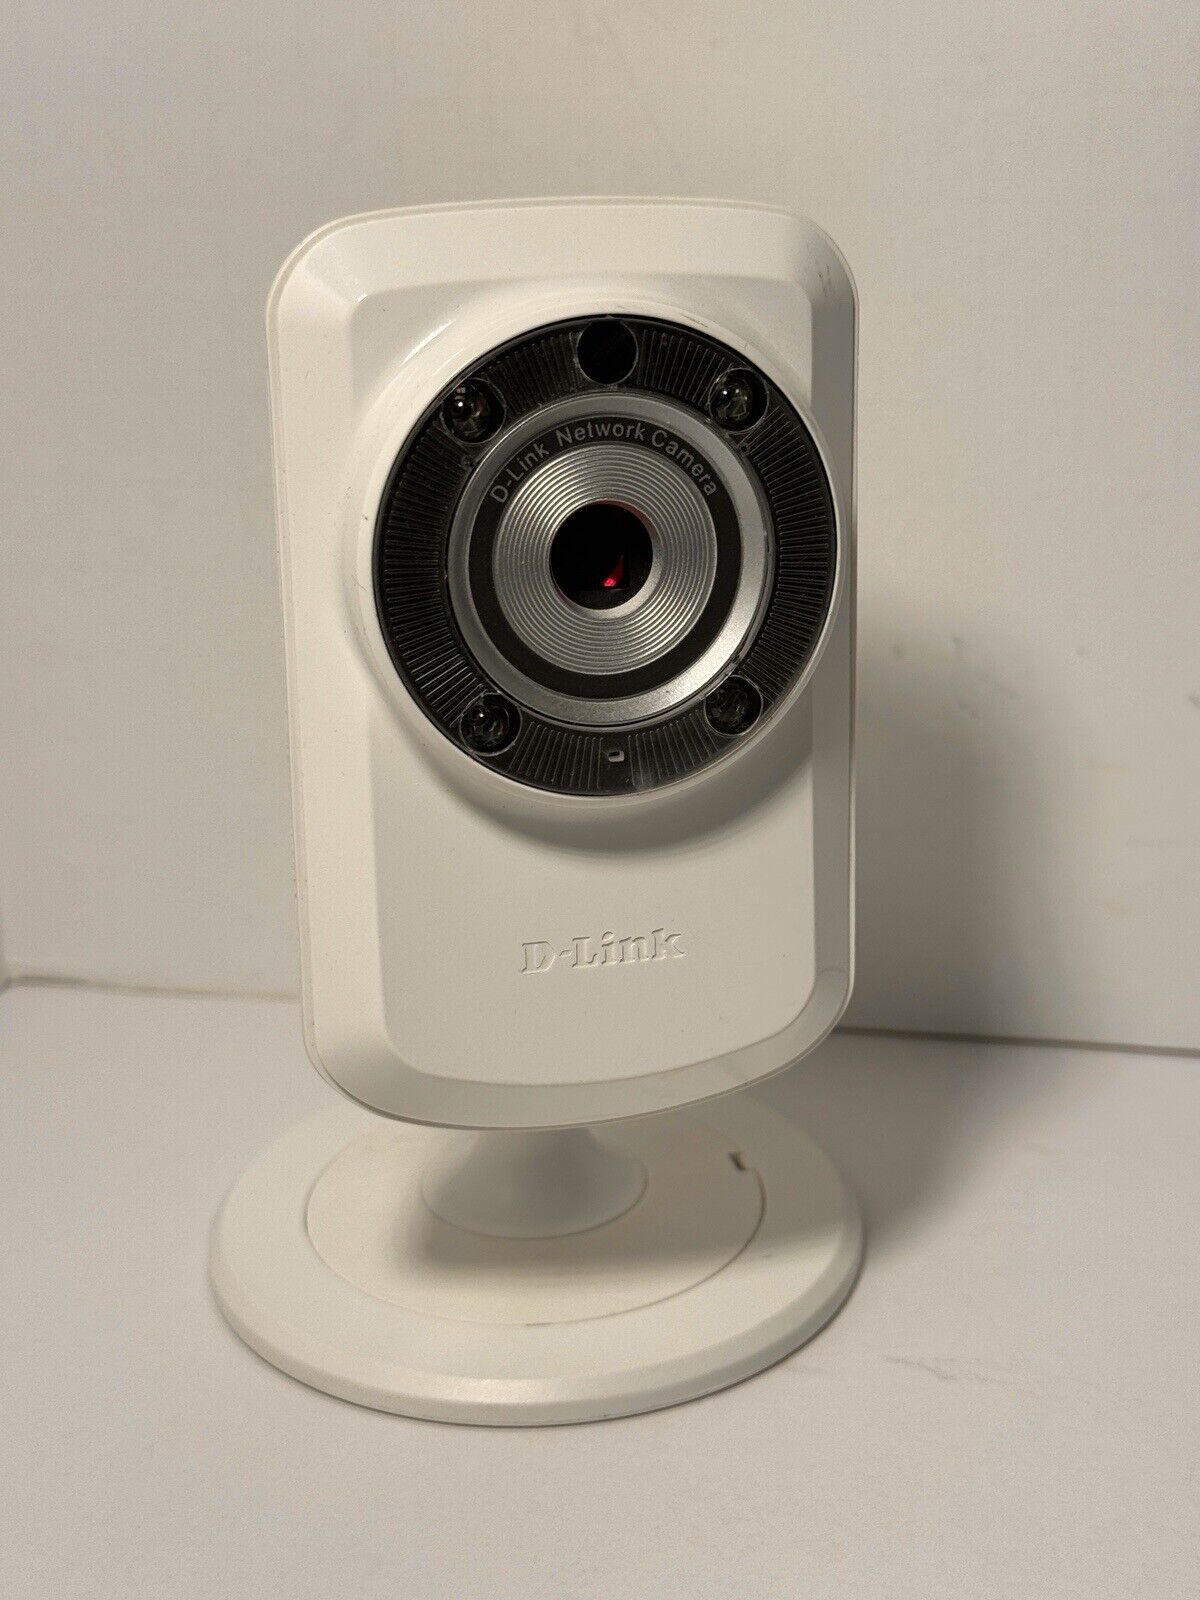 D-Link DCS-932L Web Cam Day & Night Wi-Fi Camera with Remote Viewing